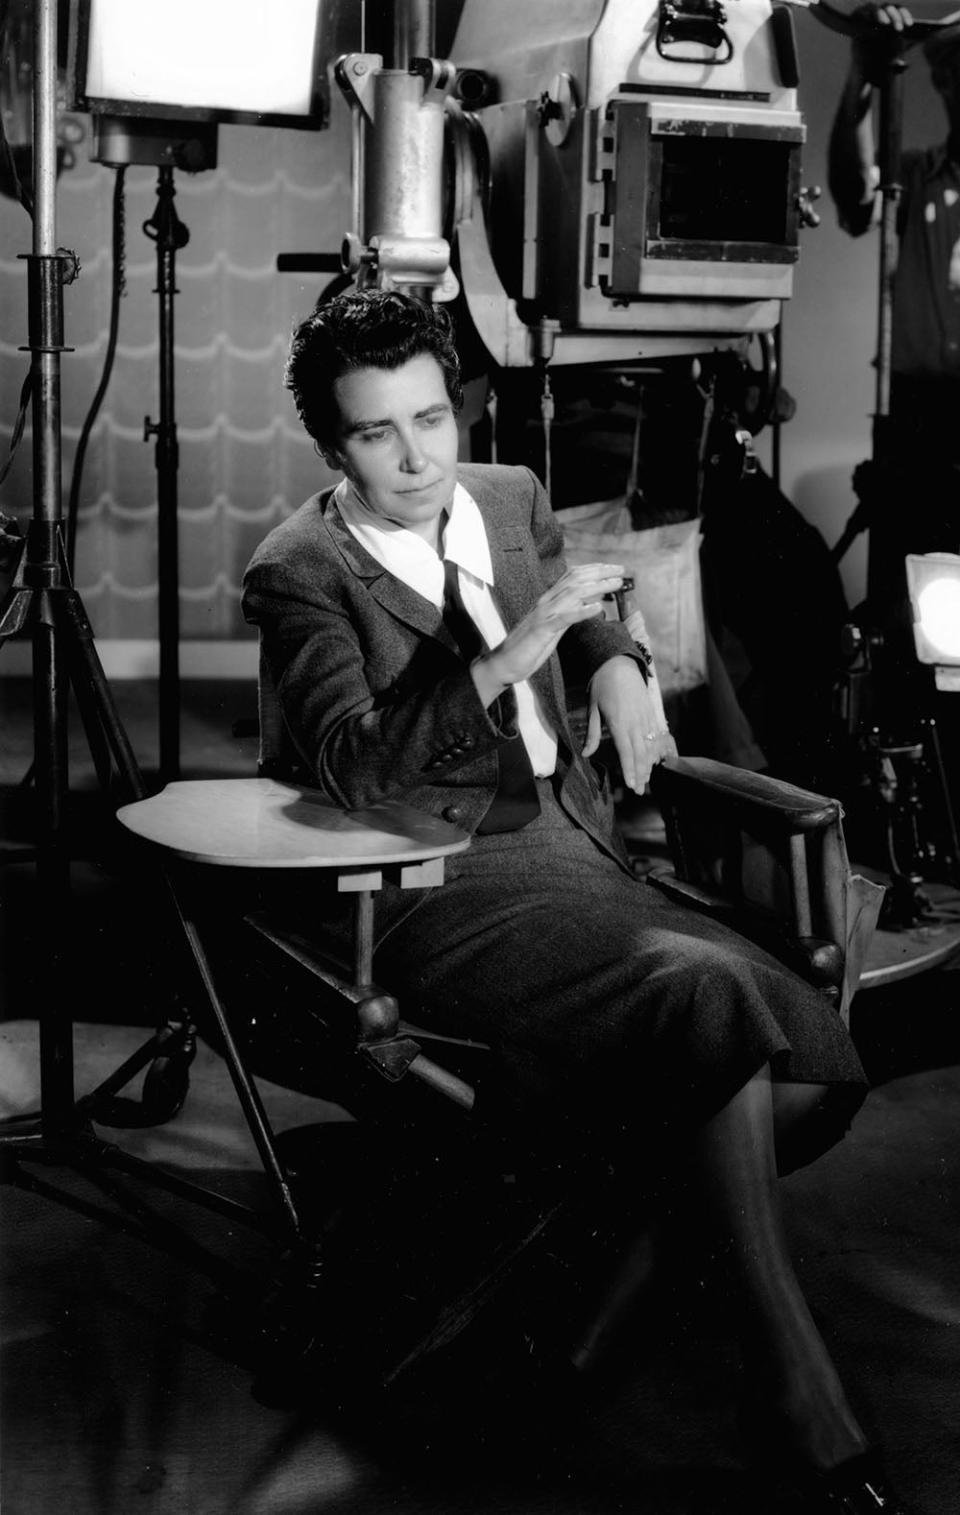 Running the show: Dorothy Arzner photographed on one of her film sets in the 1930s (Kobal/Shutterstock)